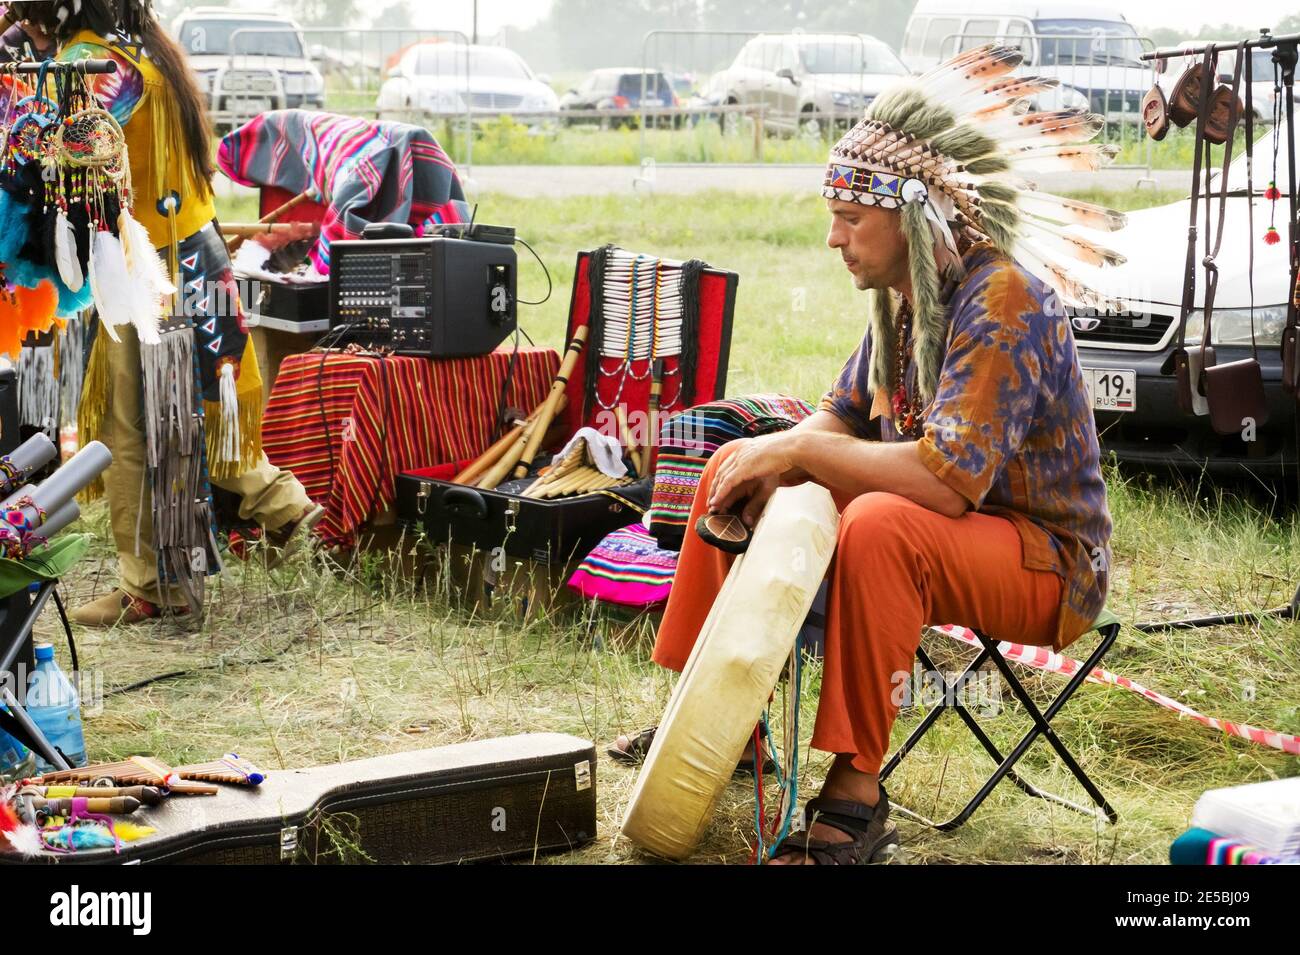 A man in a headdress with feathers and a tambourine sits near a car during the annual Intl festival of music and crafts World of Siberia. Stock Photo